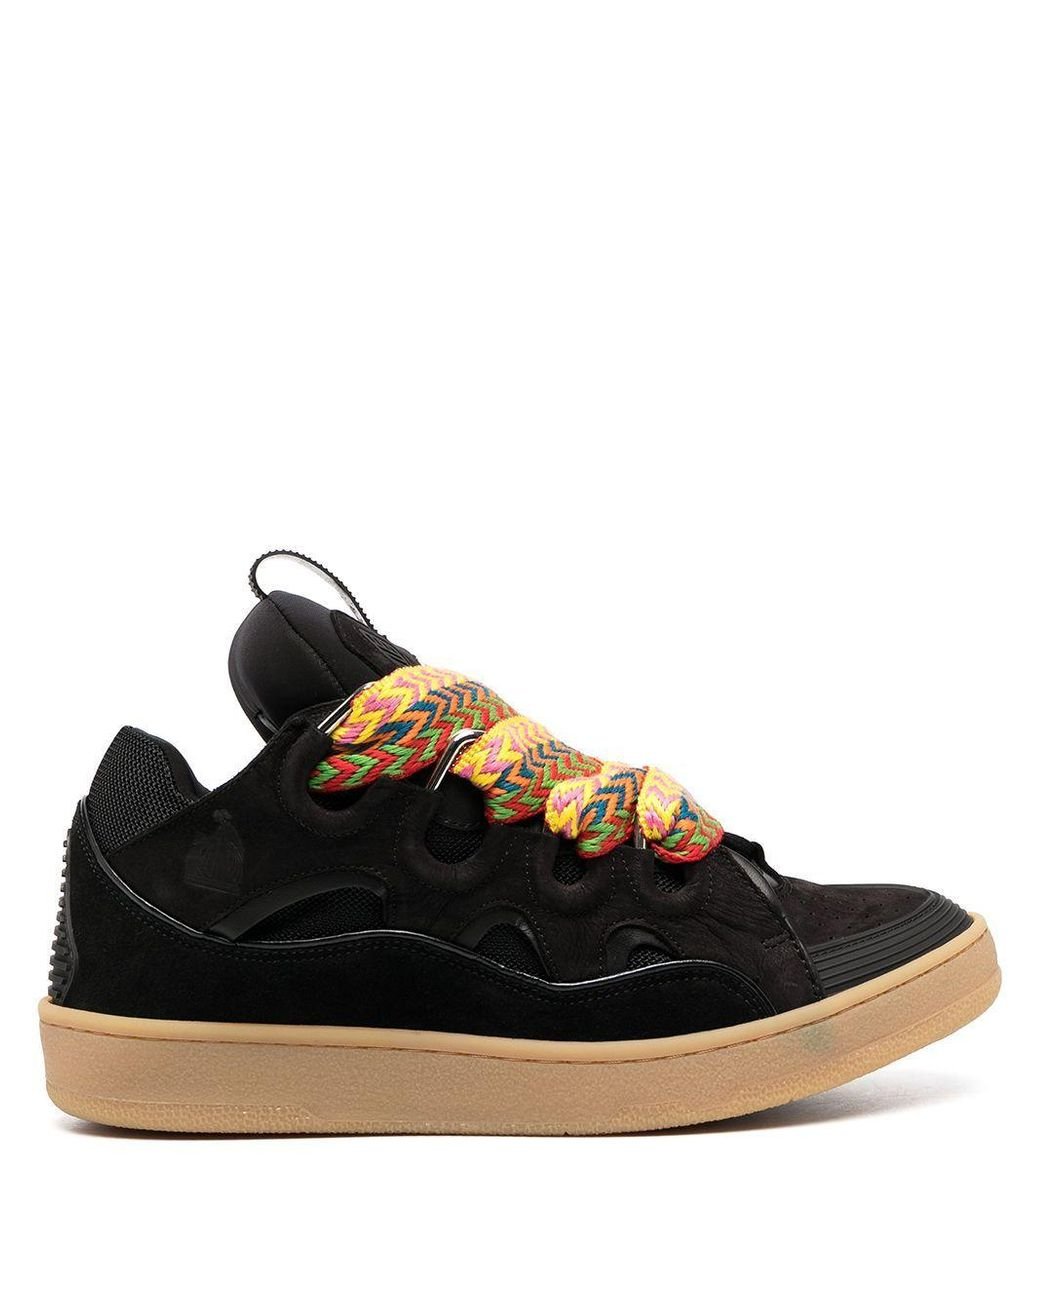 Lanvin Leather Sneakers in Black for Men - Save 40% - Lyst